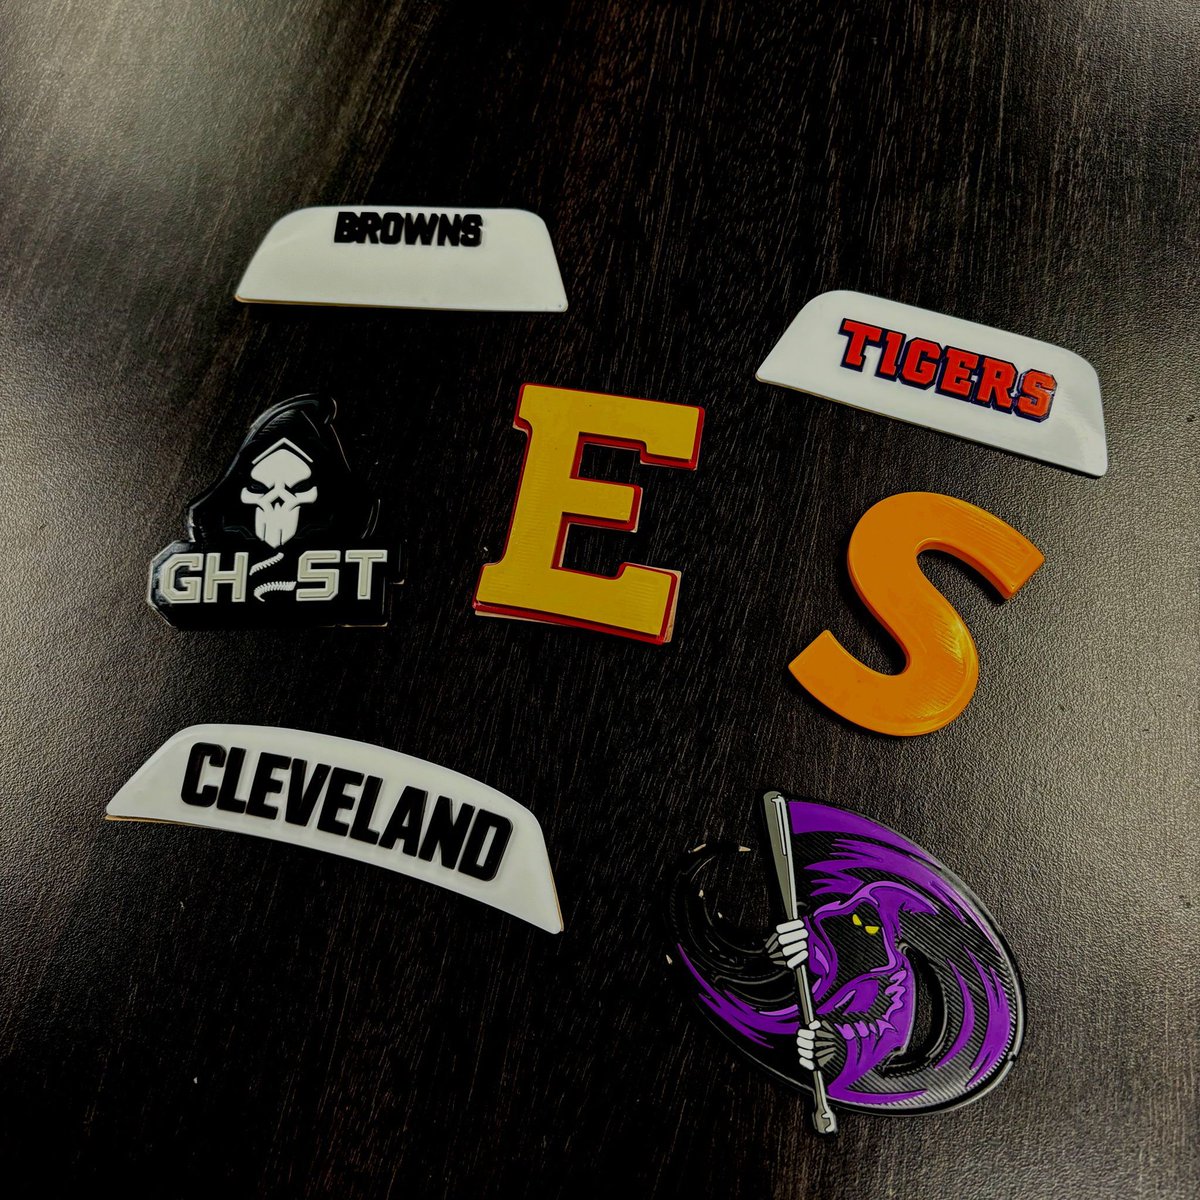 ❗New 3-D helmet decal #Samples!❗

These are the perfect addition to almost any baseball or football helmet- reach out to your sales rep. to see if they are a good fit for your #Logo!

#BakersMade #TeamSports #HelmetDecals #SportingGoods #SportsApparel